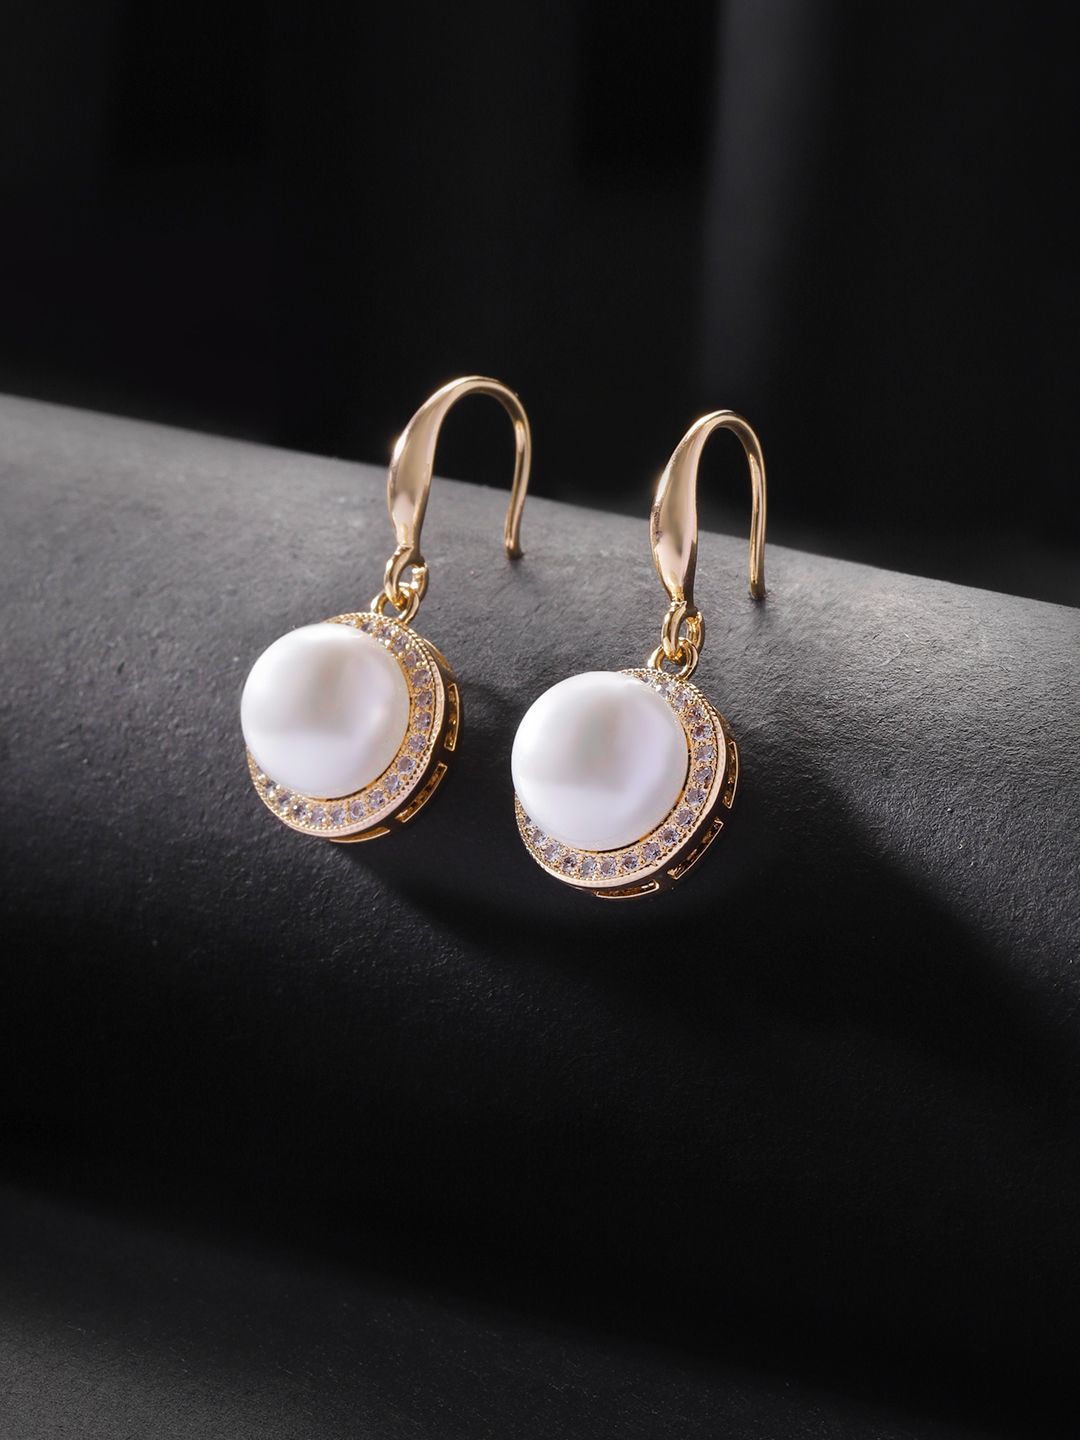 Carlton London White Gold-Plated Beaded & Stone-Studded Circular Drop Earrings Price in India